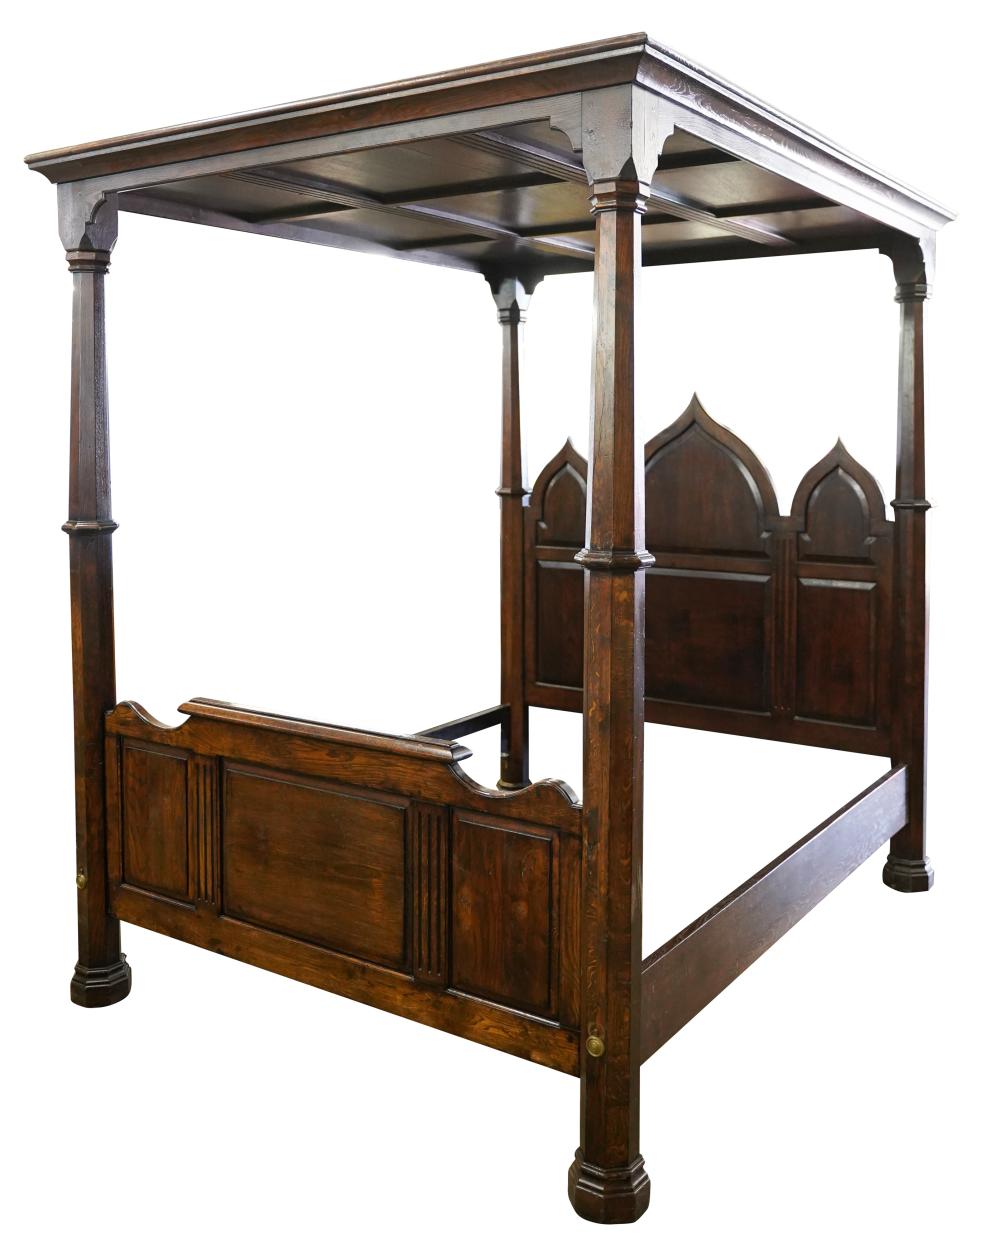 GOTHIC-STYLE OAK QUEEN-SIZED BEDwith